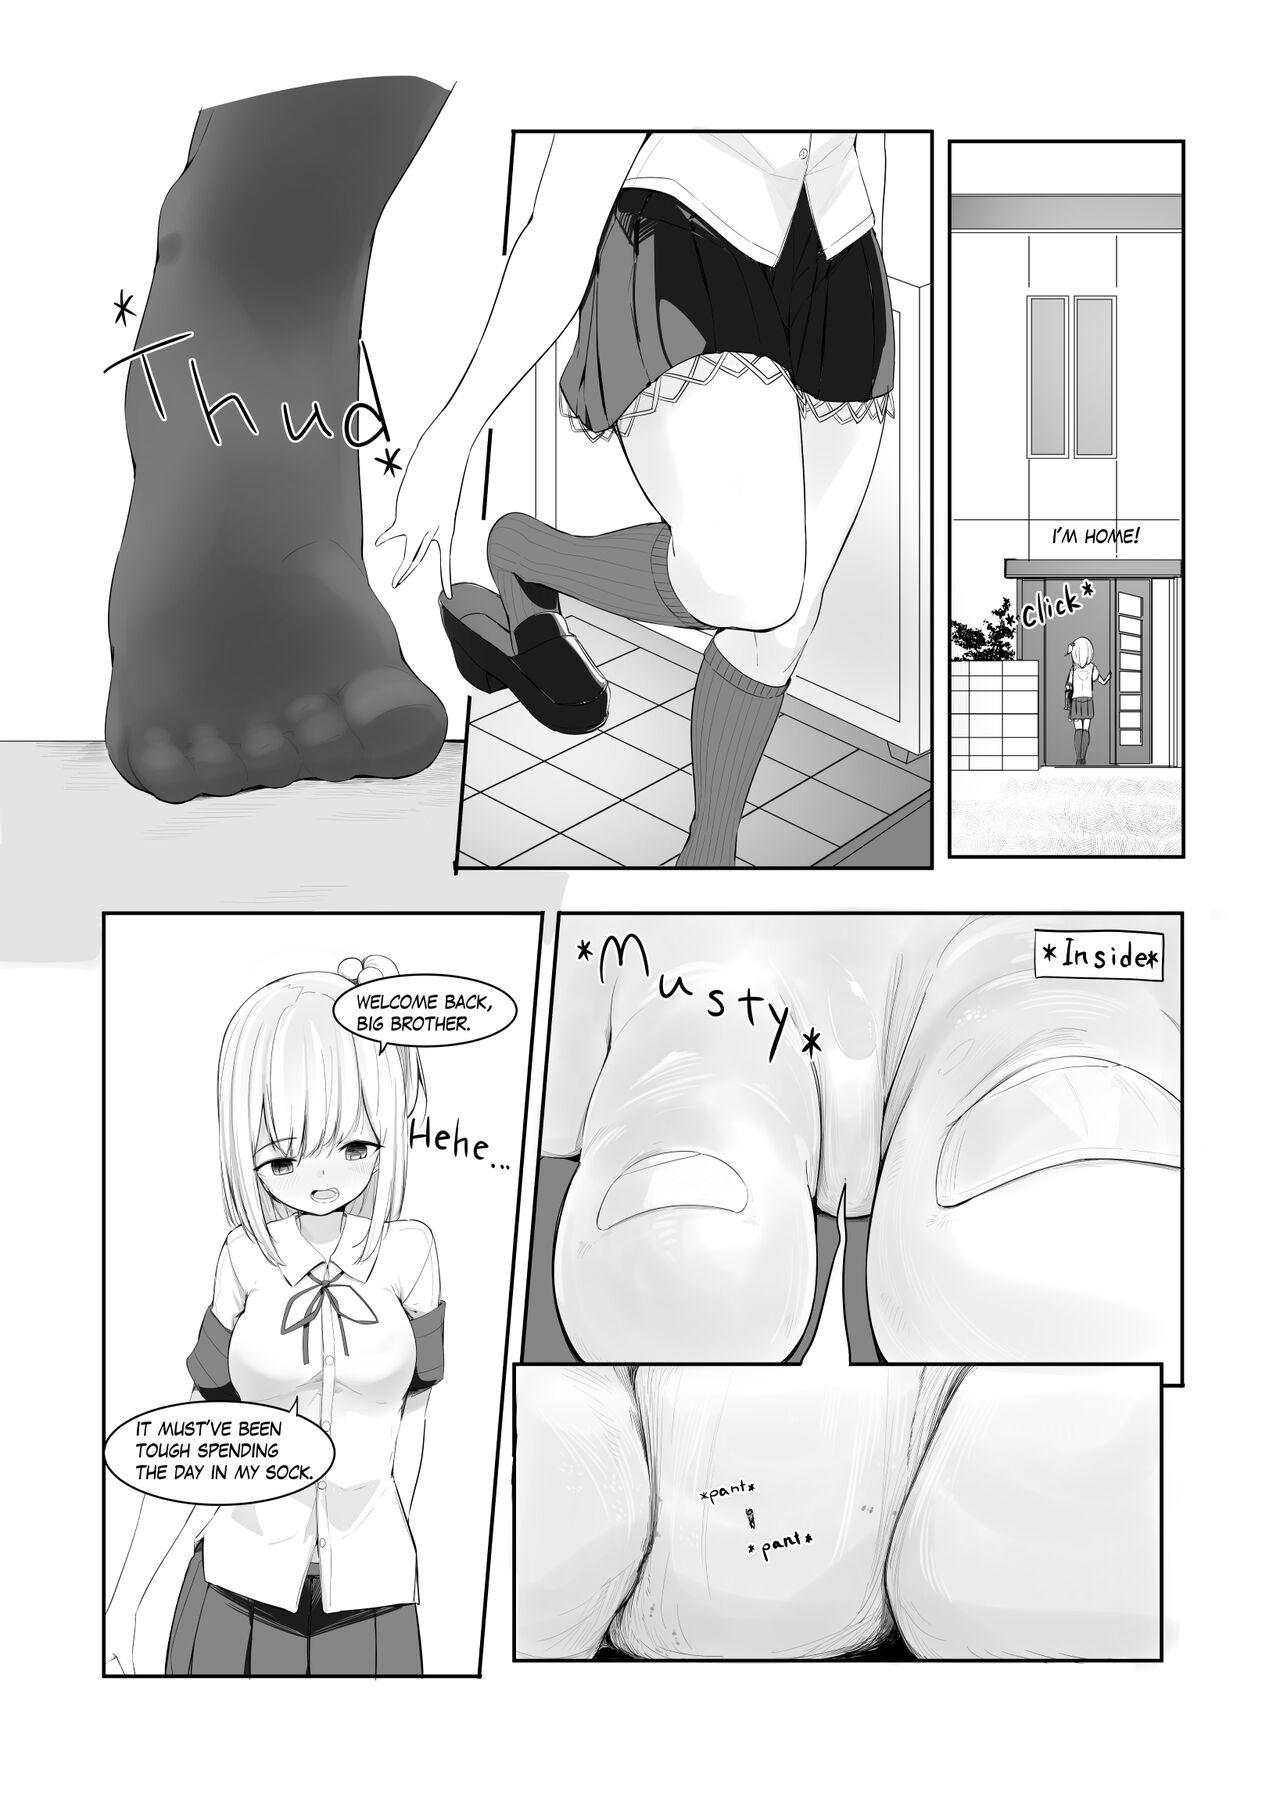 Fist Cheeky JK Shrinks Me Down And Takes Everything From Me. Analfucking - Page 1